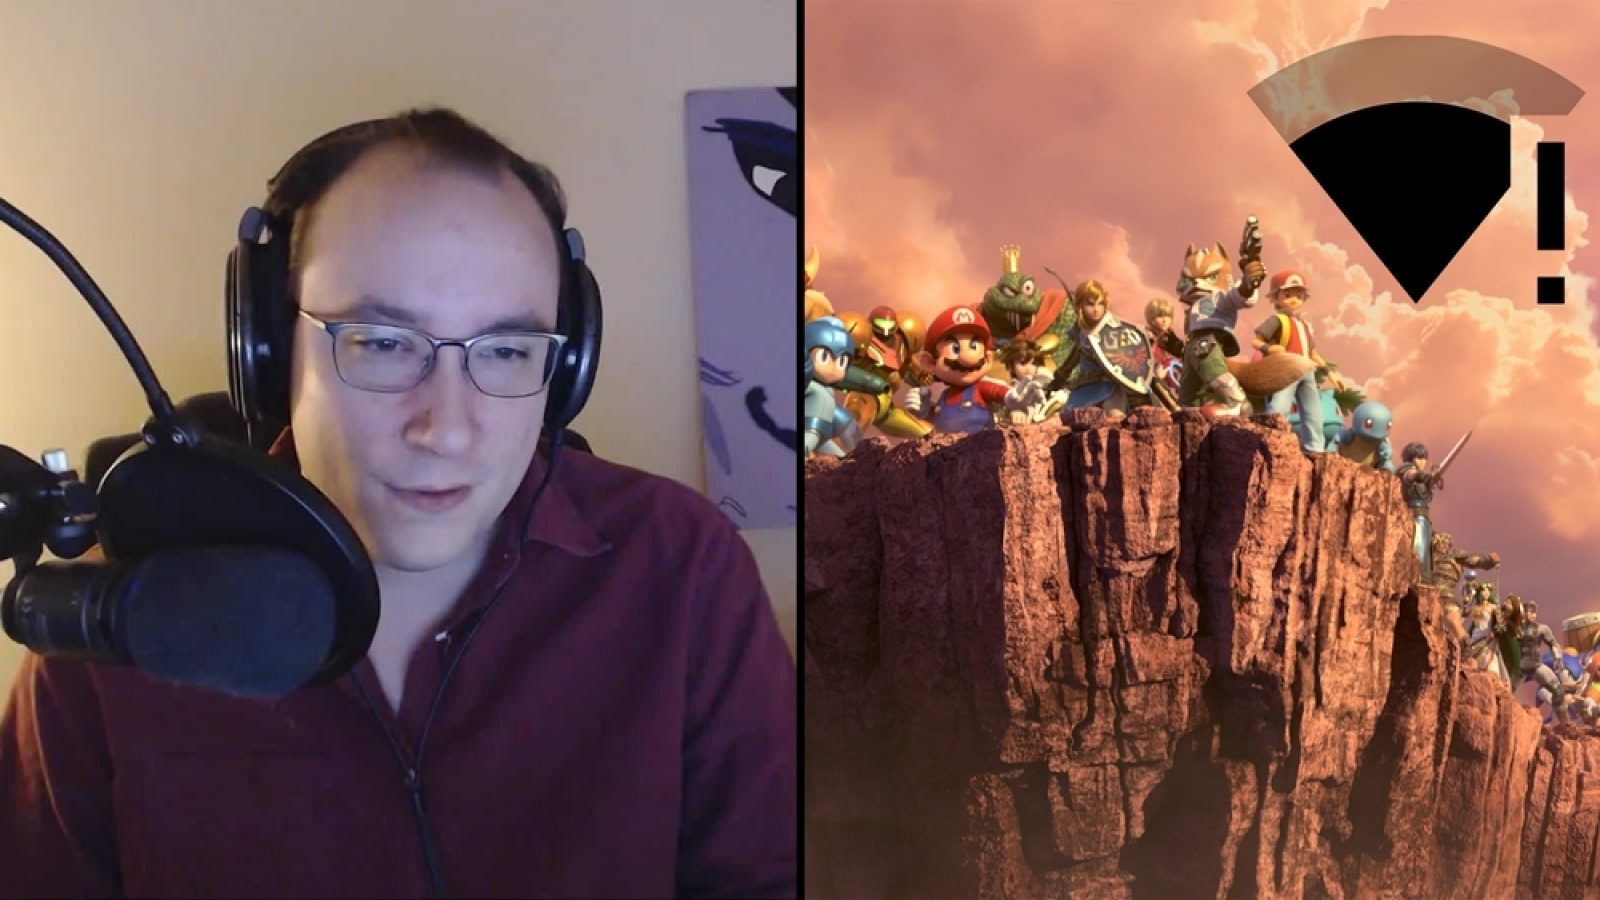 Super Smash Bros. Ultimate: How to finish the “Torchlight reveals the hour”  quest in World of Light - Dexerto